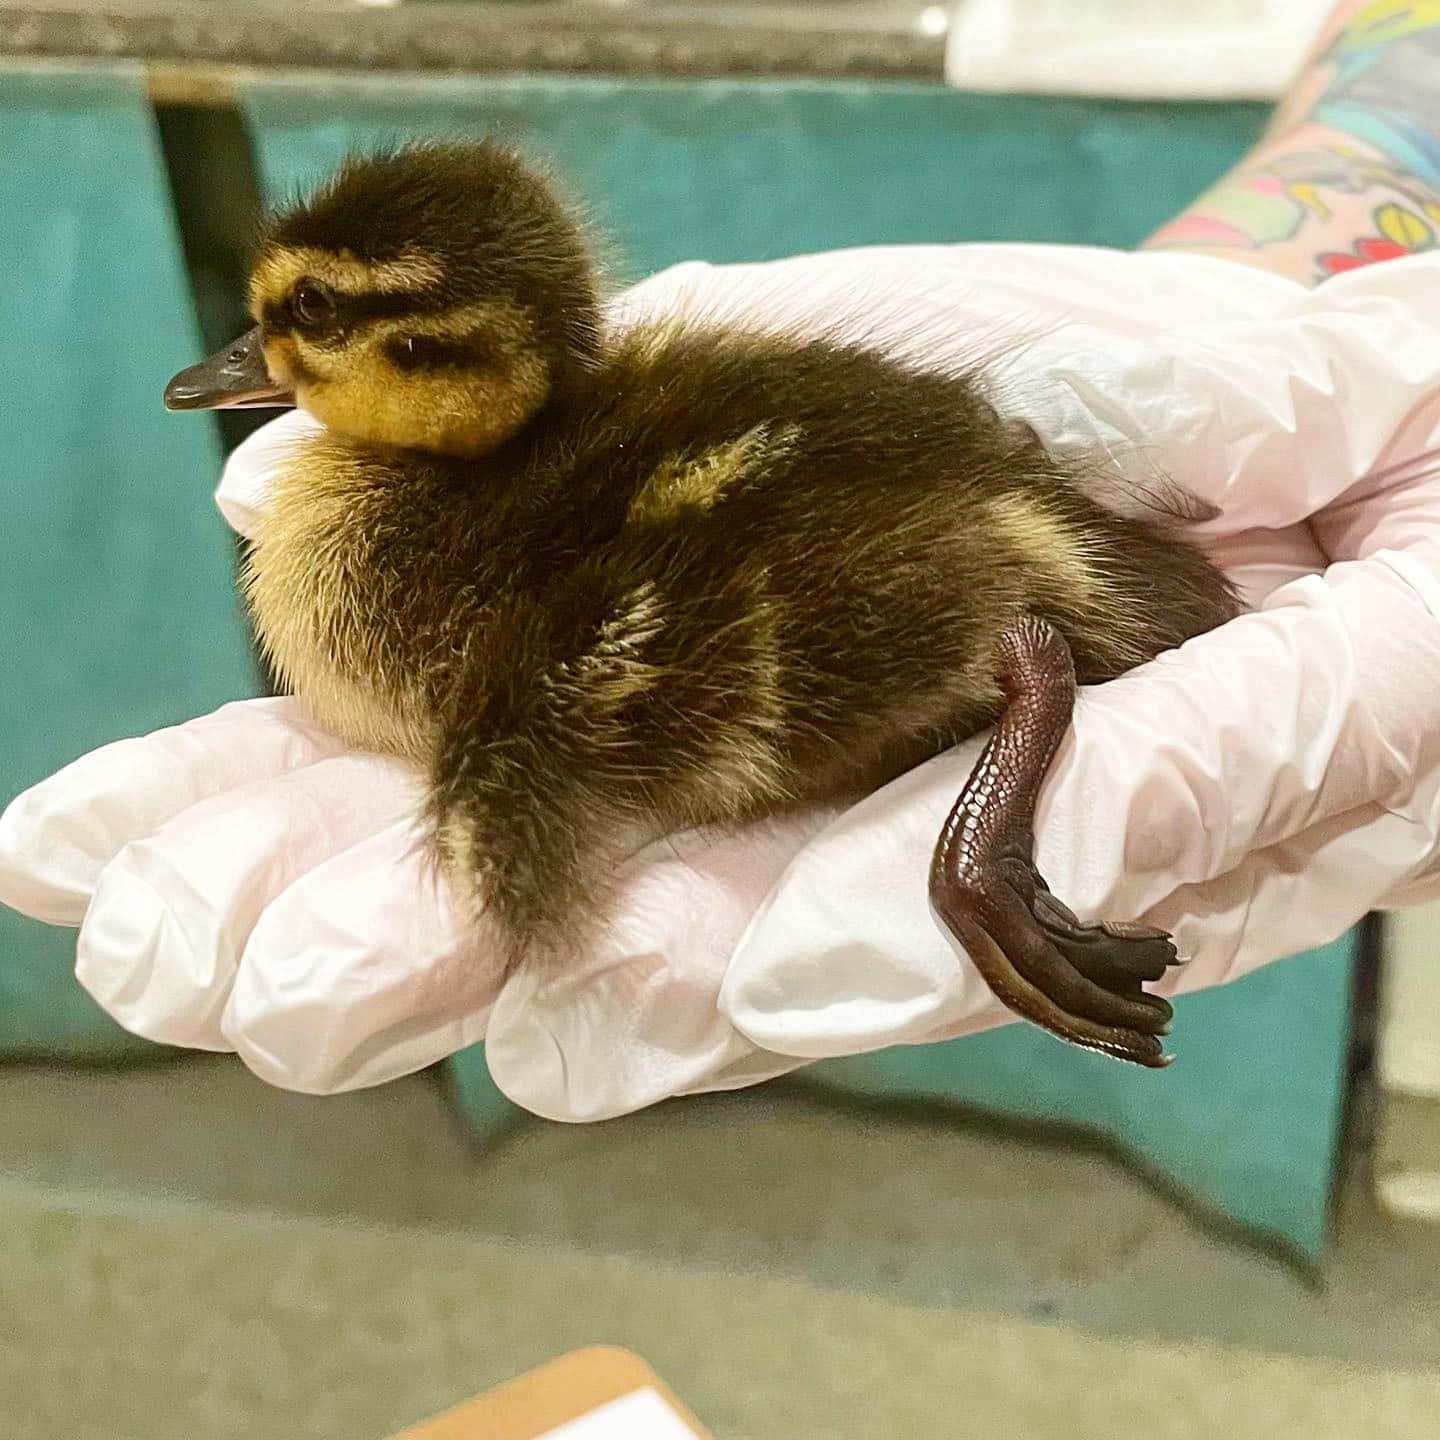 A Baby Duck Is Being Held By A Person In A Glove